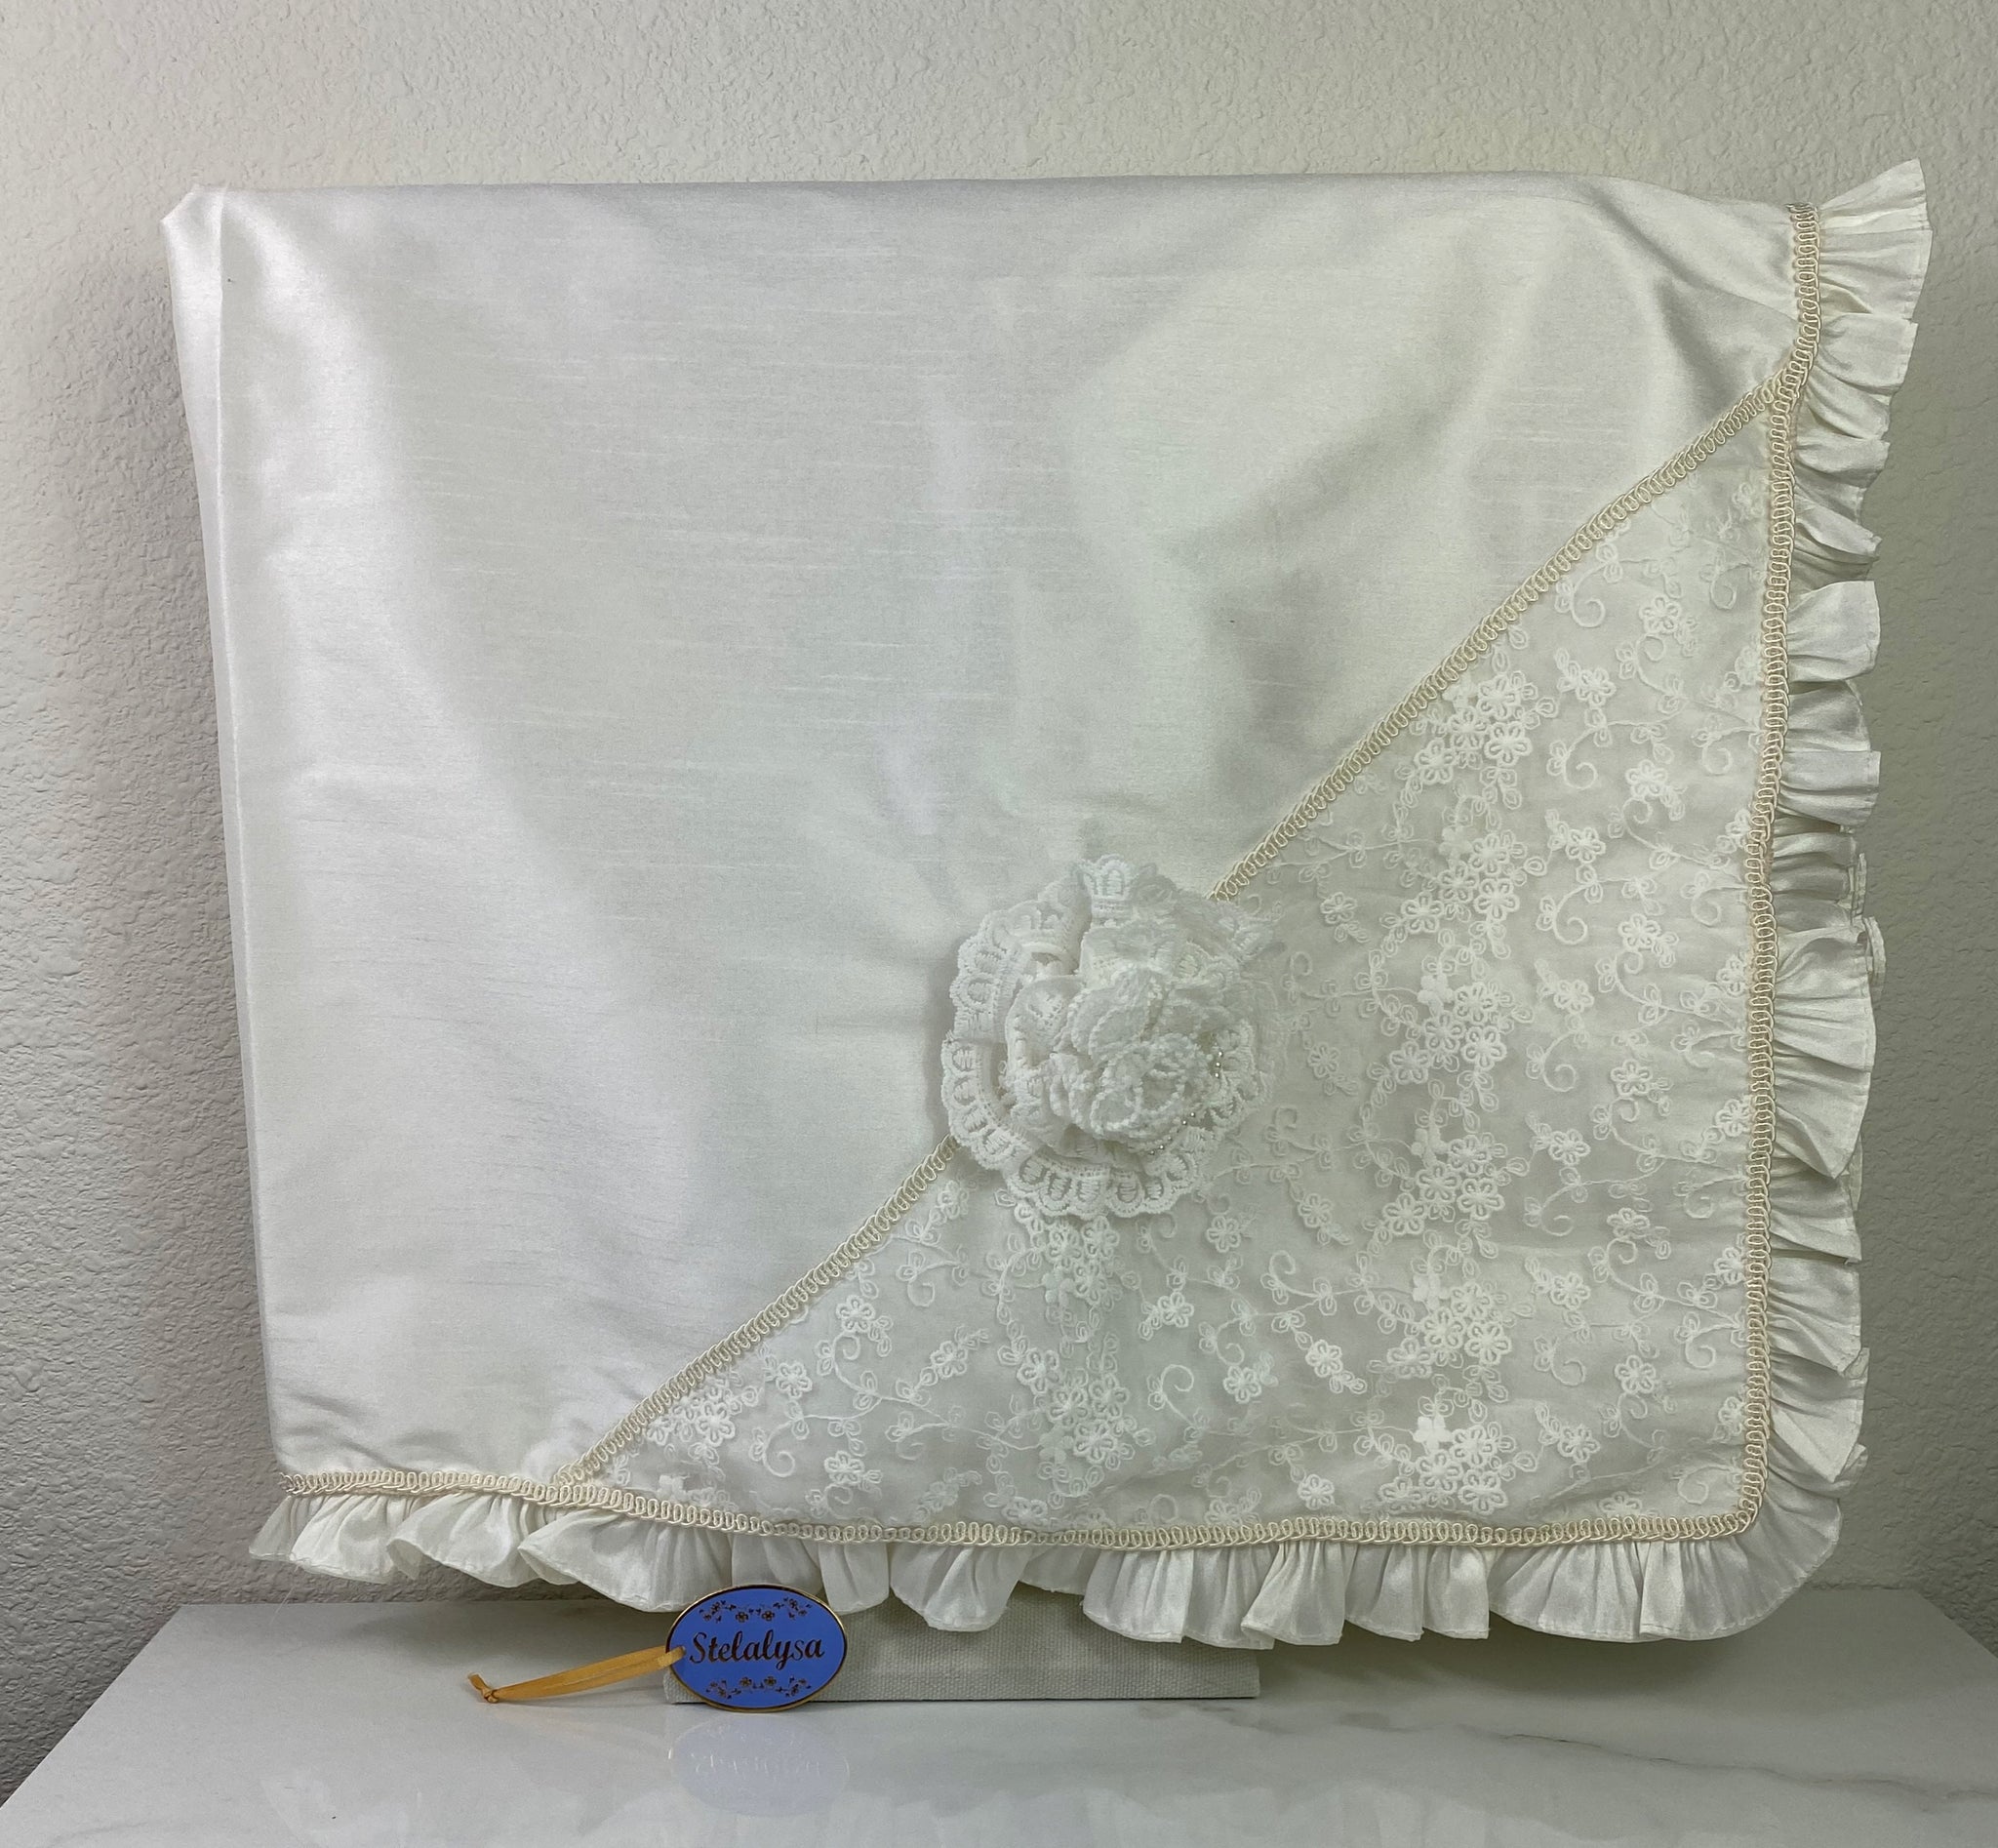 Beautiful ivory silk baptism blanket with a lovely lace overlay and flower.